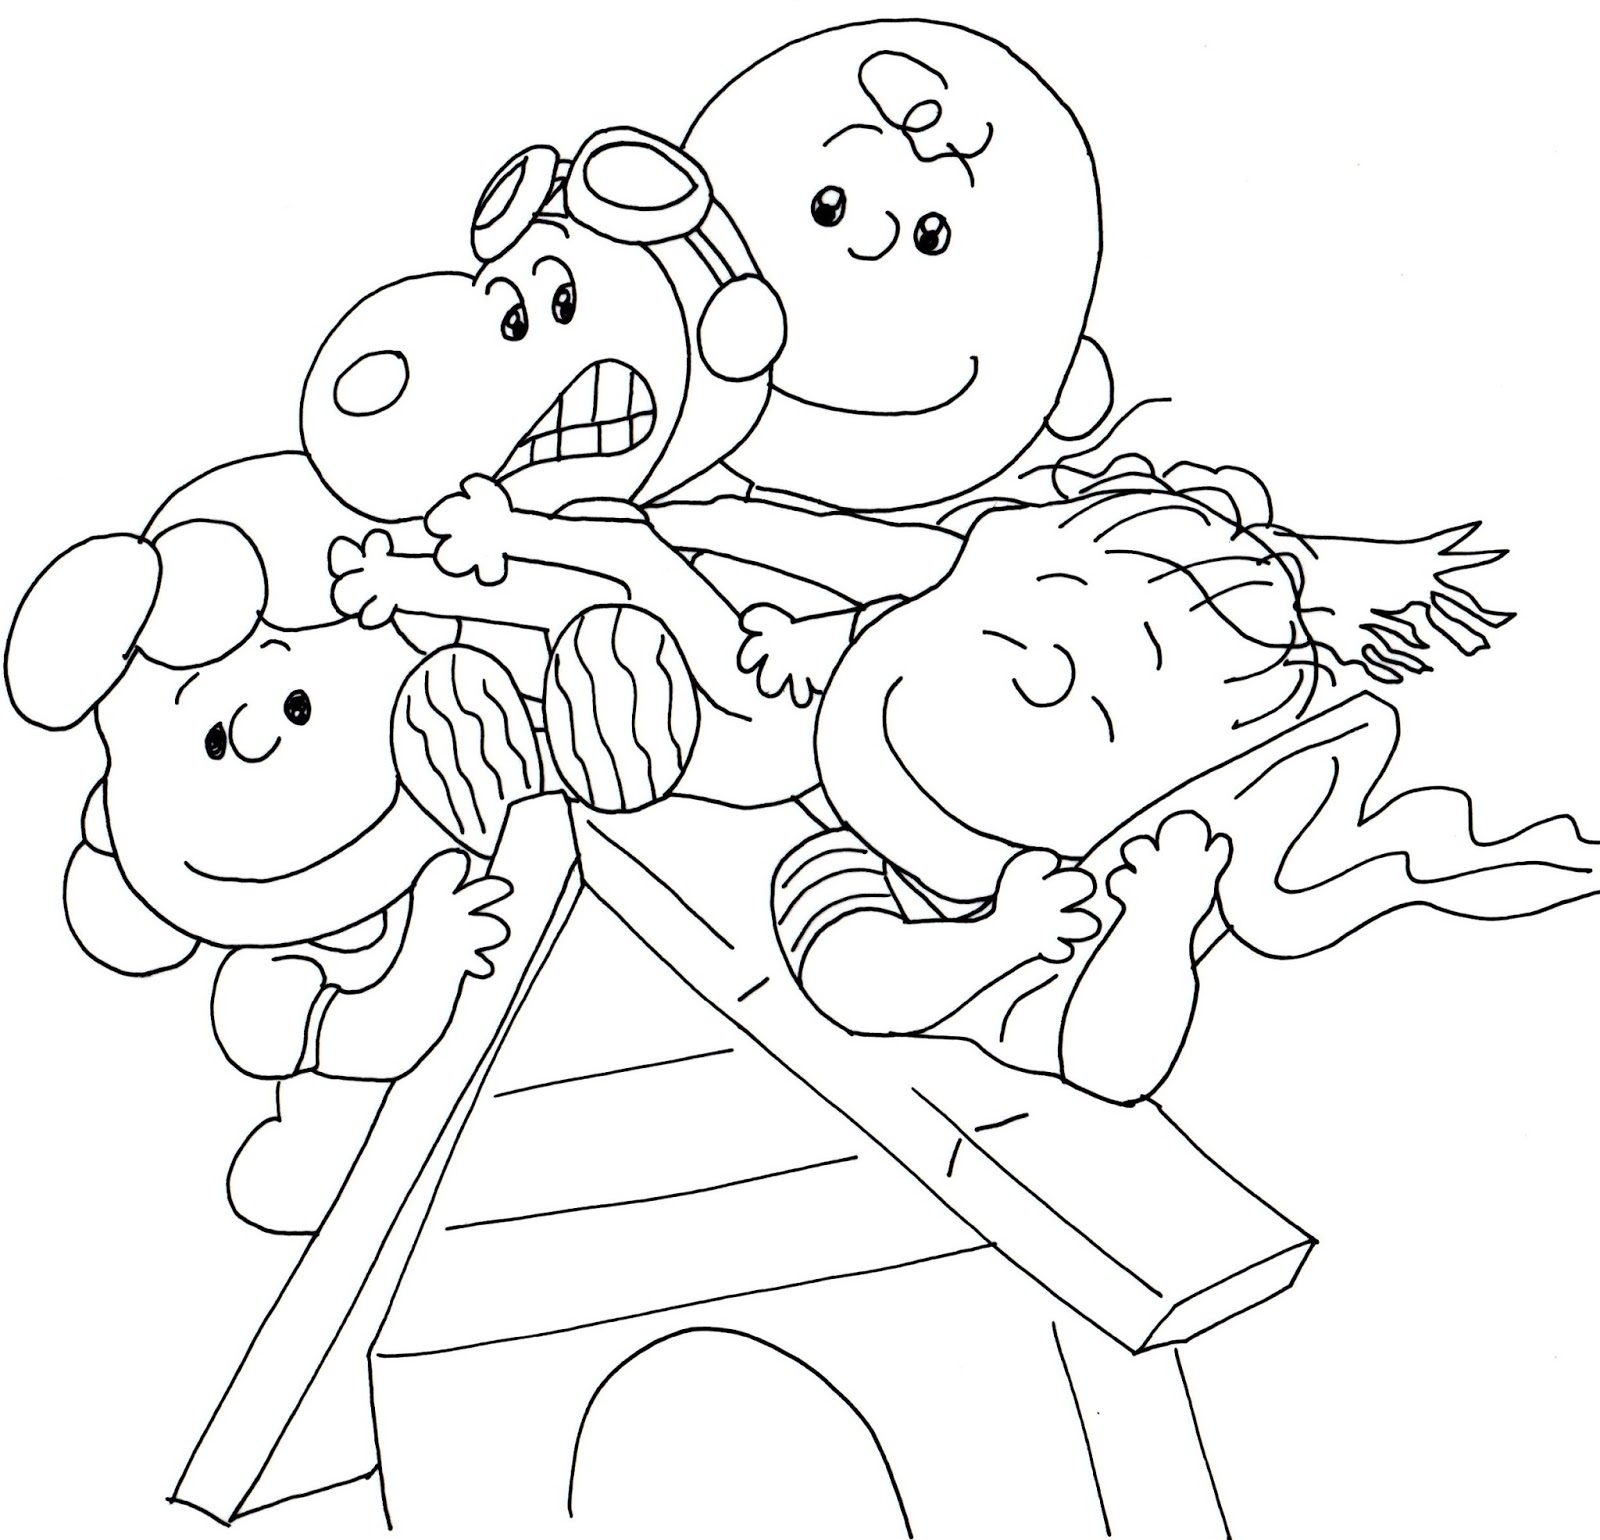 The Peanuts Movie Coloring Pages at GetColorings.com ...